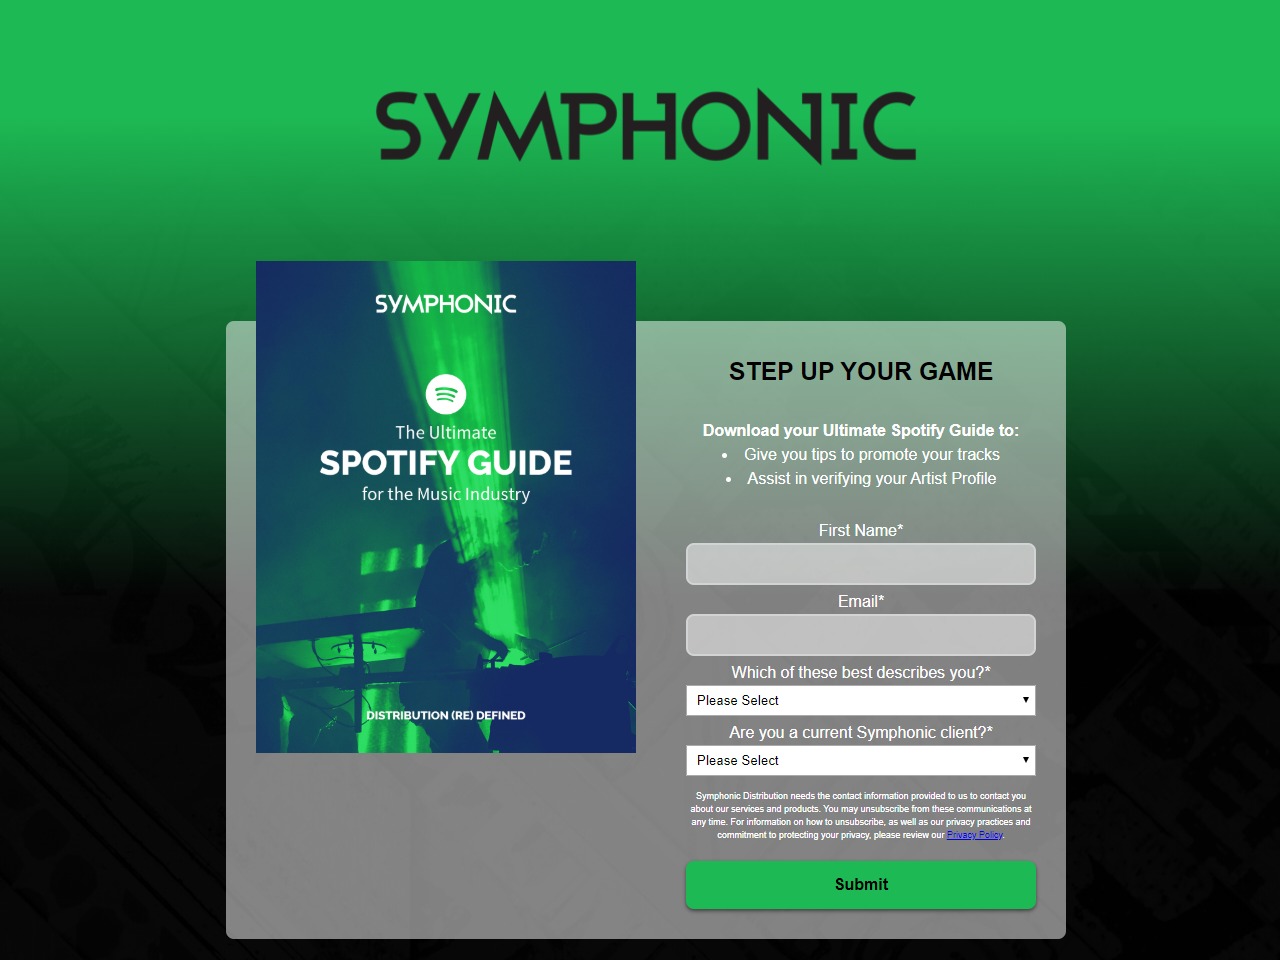 The Ultimate Spotify Guide for The Music Industry